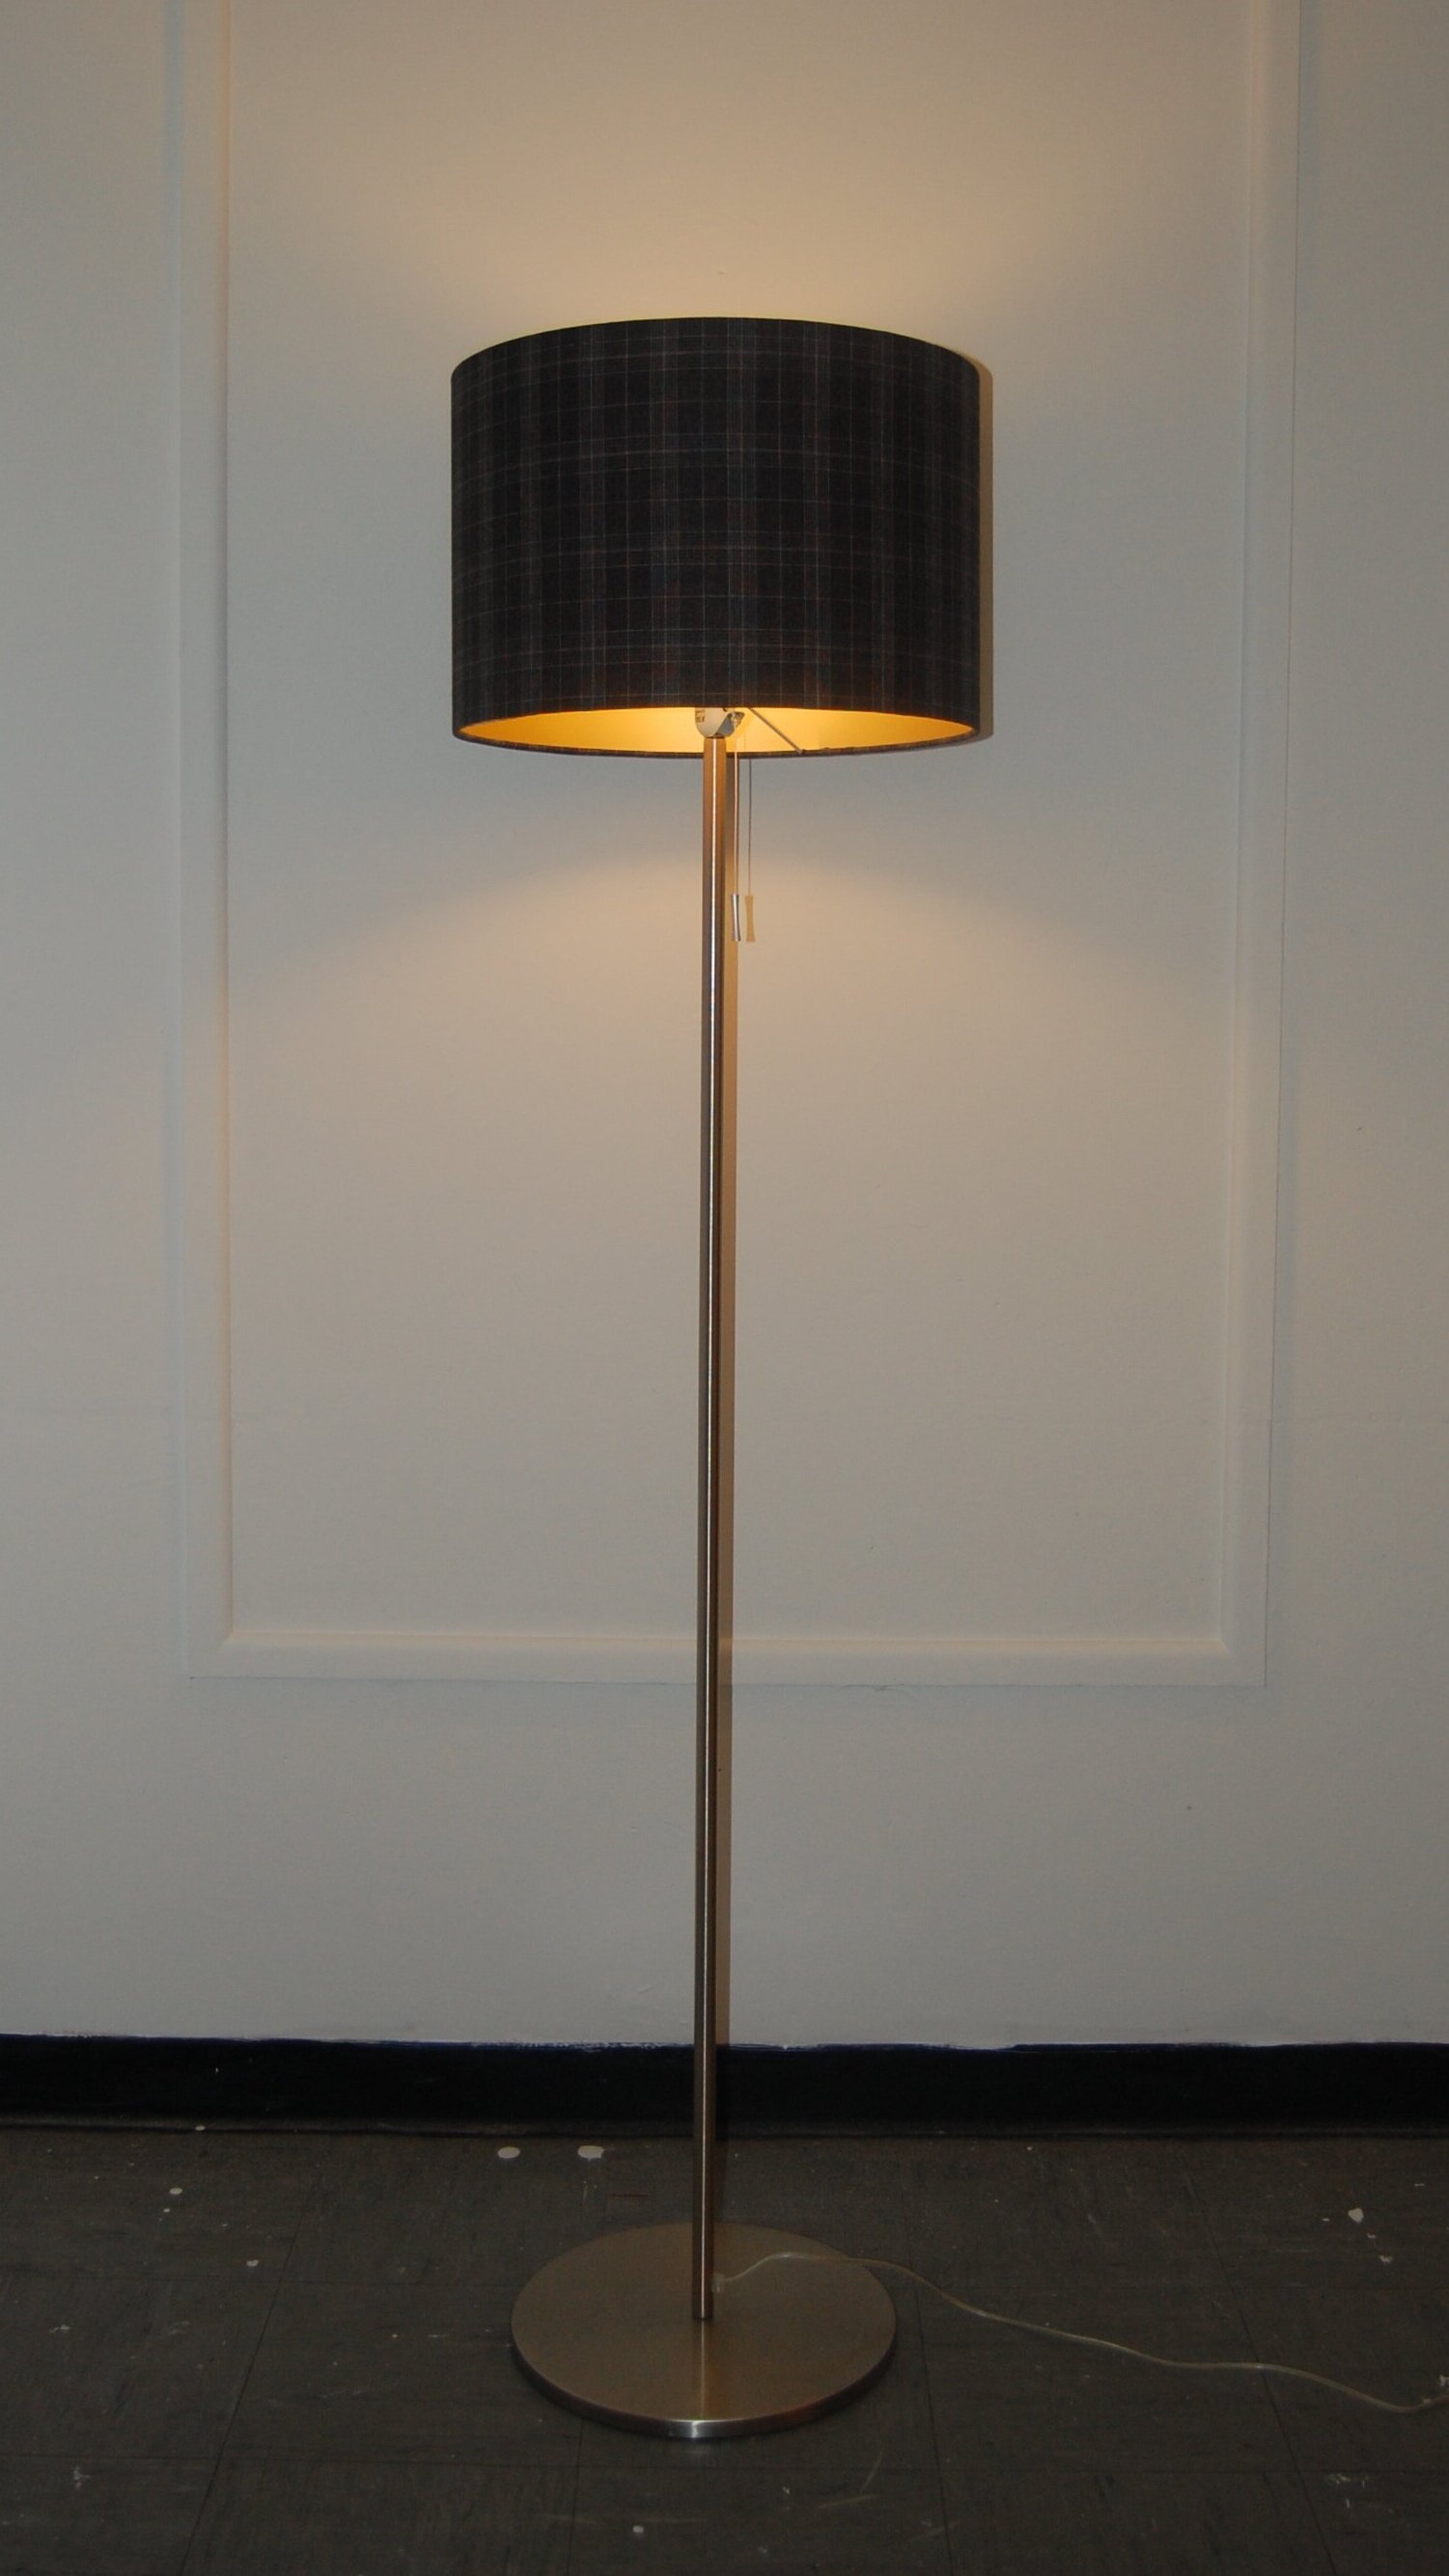 Bespoke Floor Lamp Shades And Standard, How Big Should A Lampshade Be For Floor Lamp